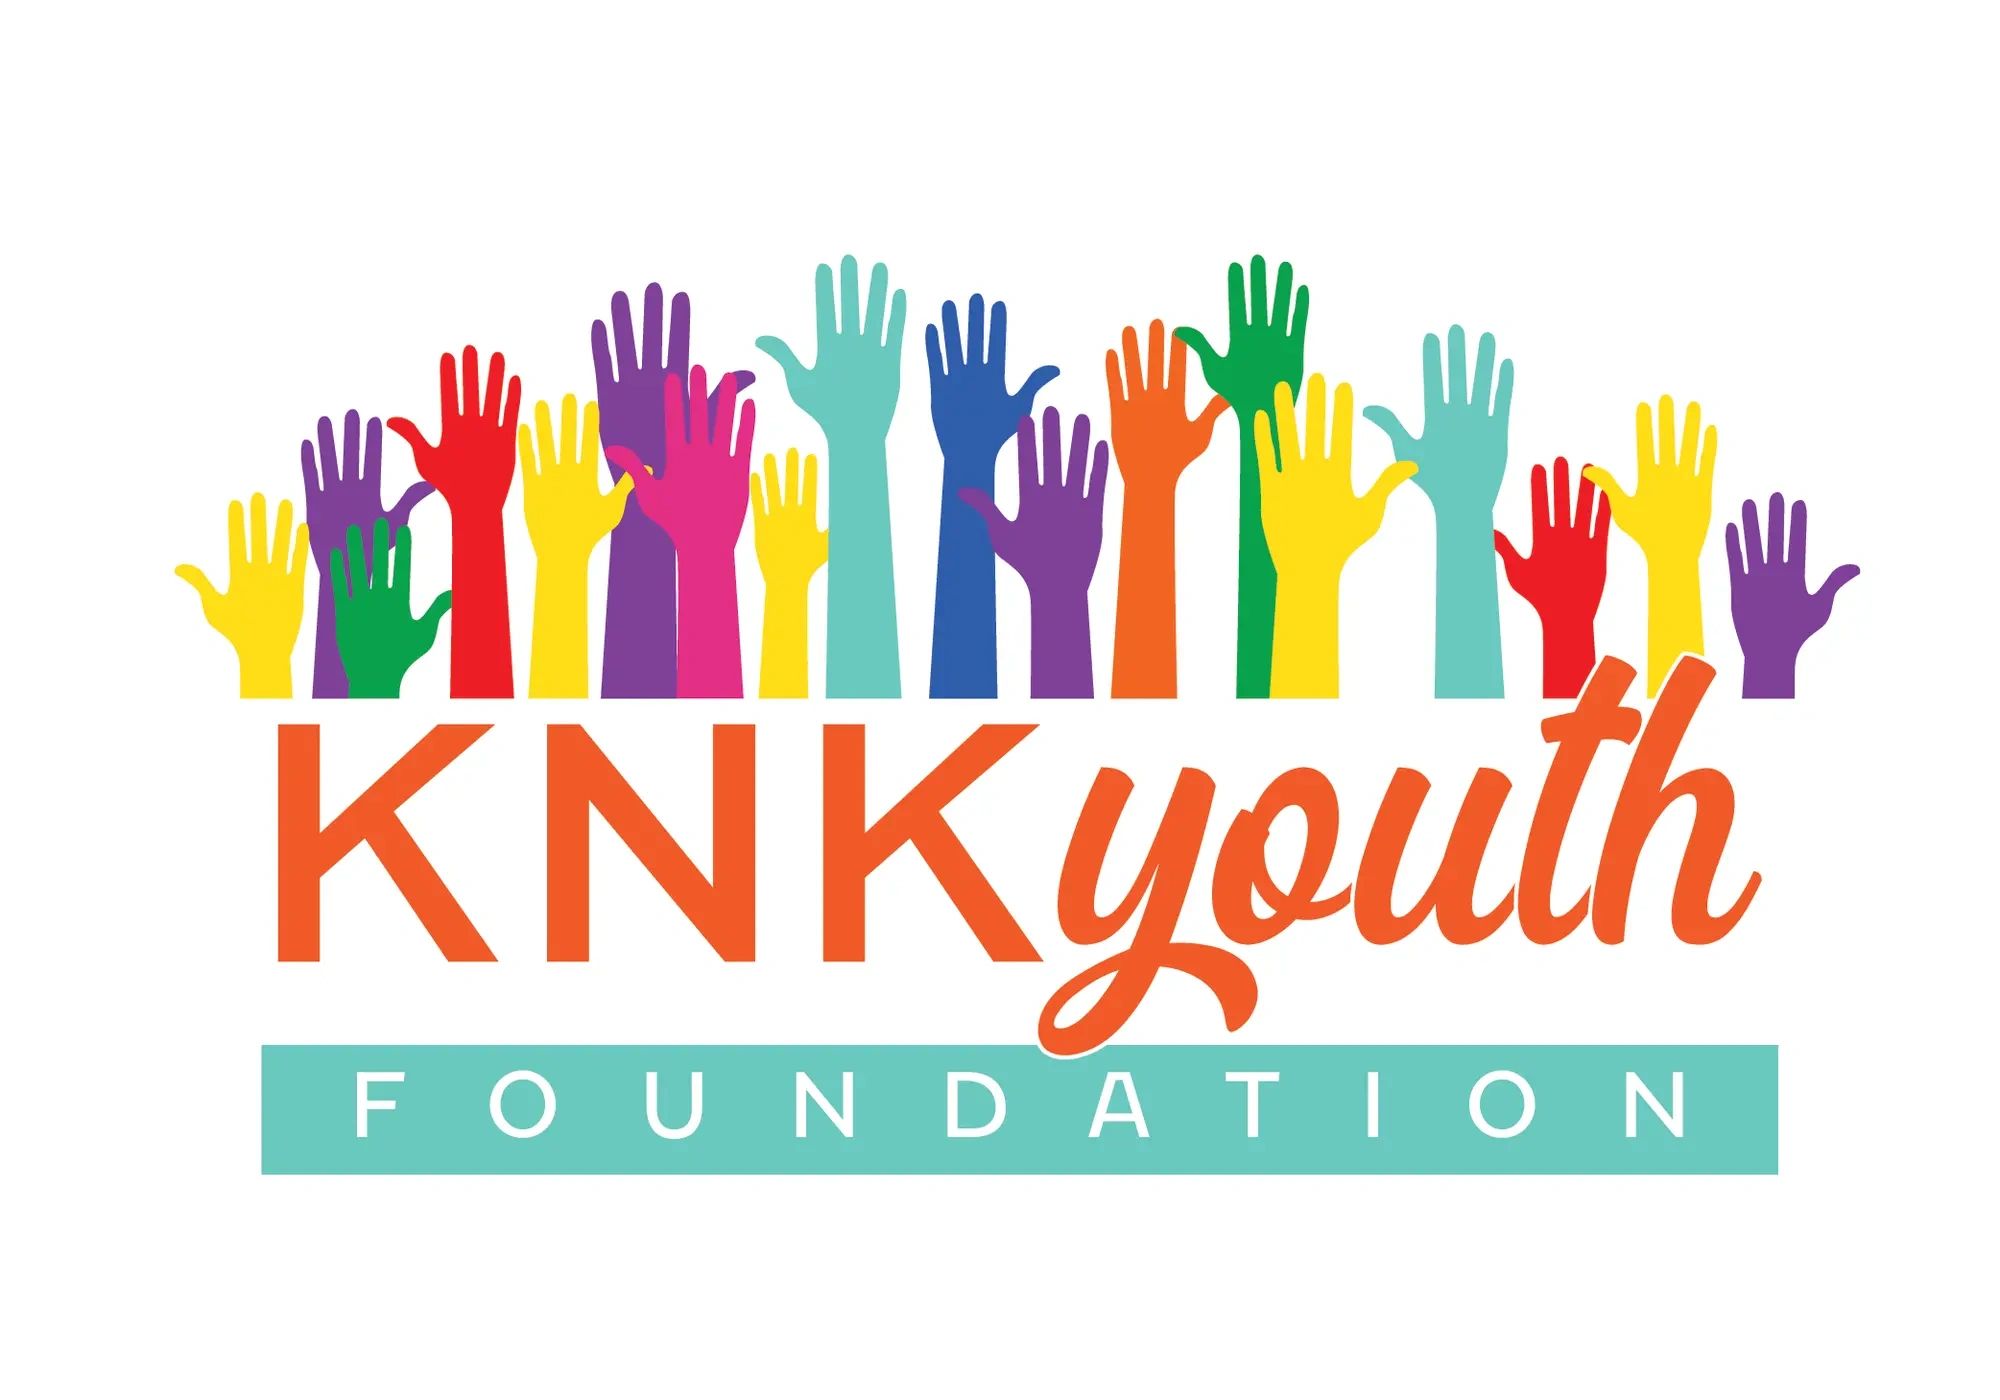 youth fundraiser clipart